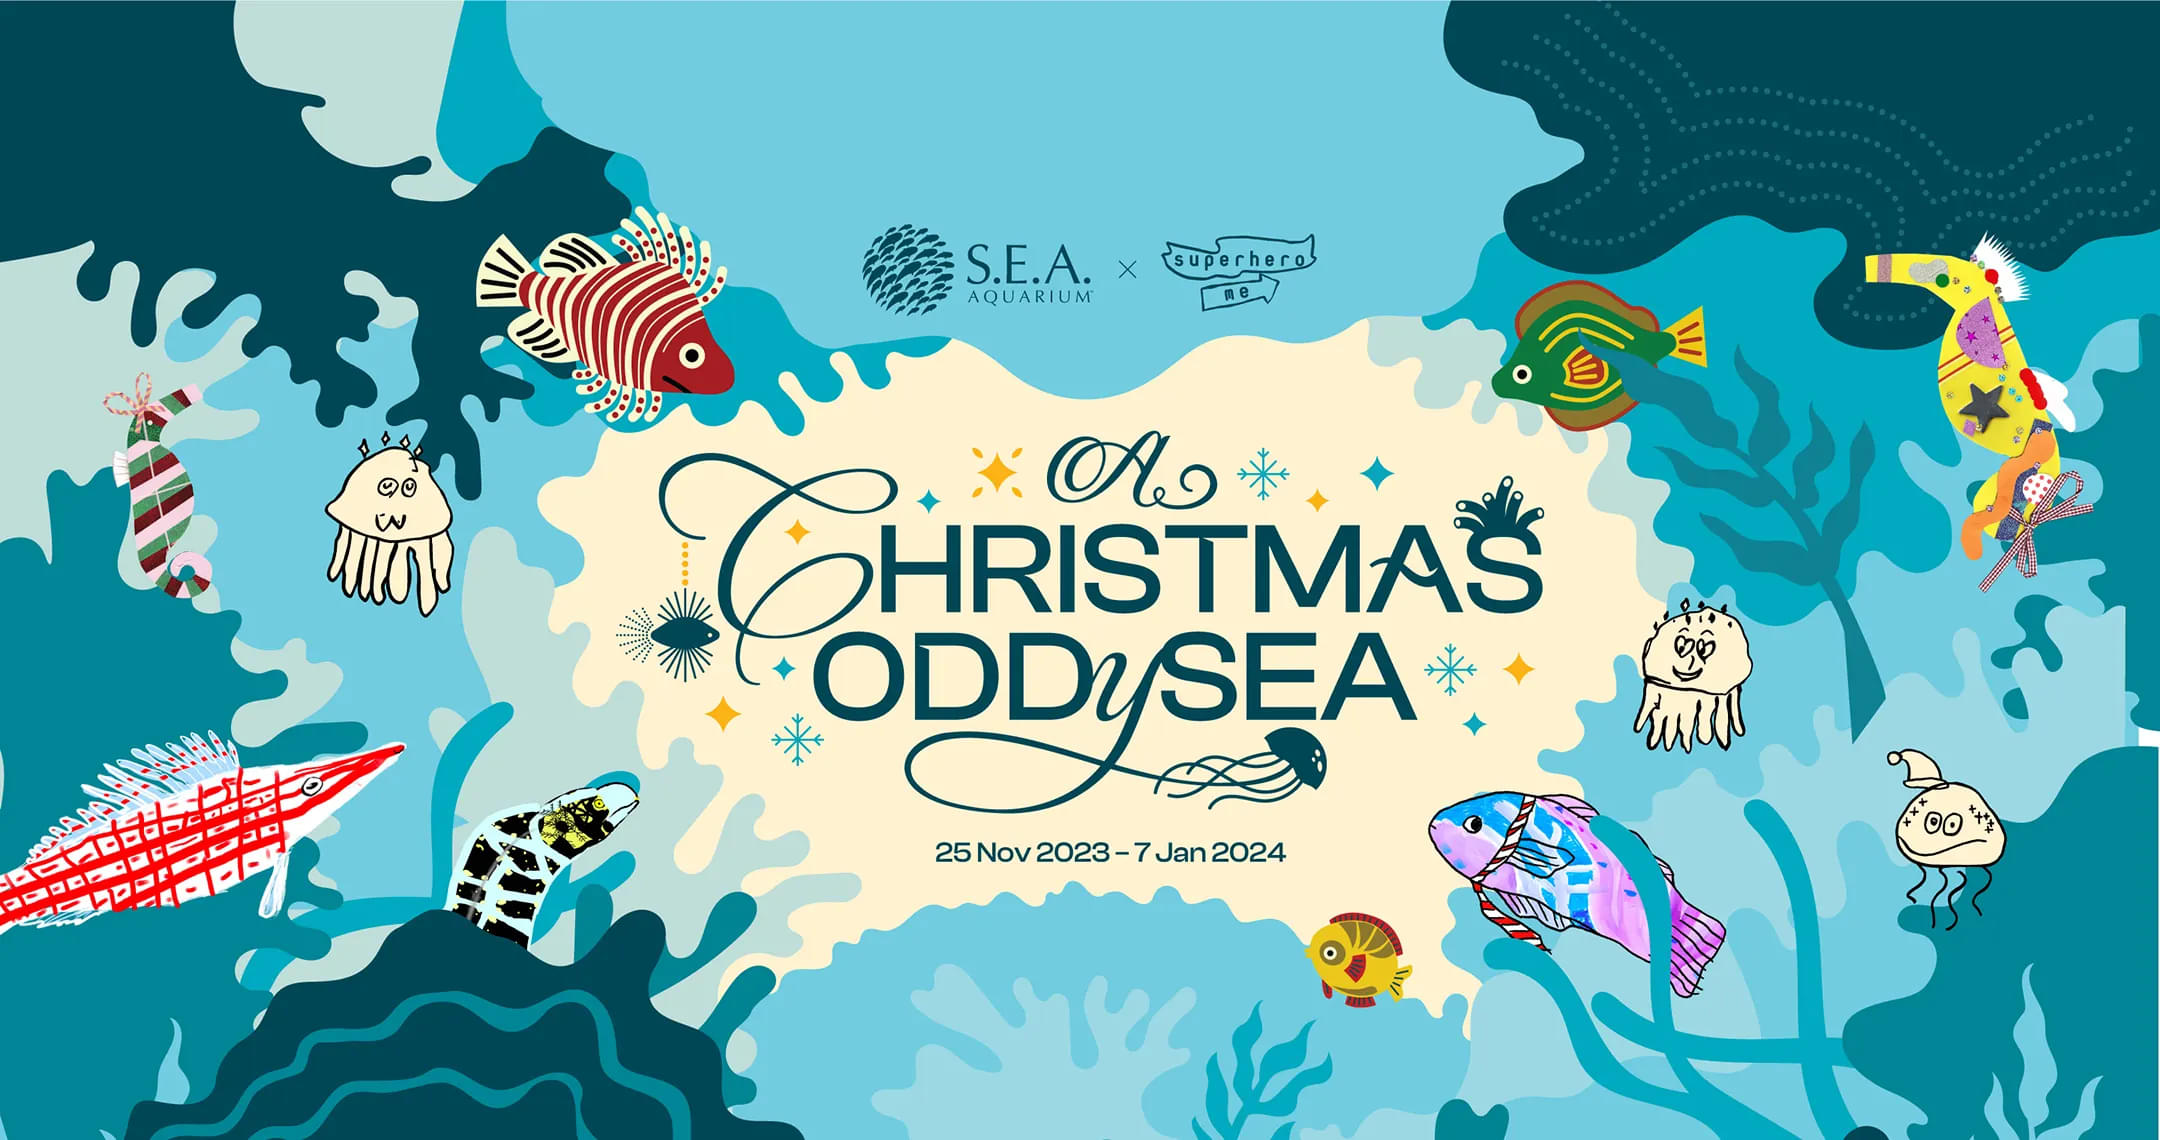 Marvel at the marine world reimagined by the Superhero Me community at A Christmas Oddysea